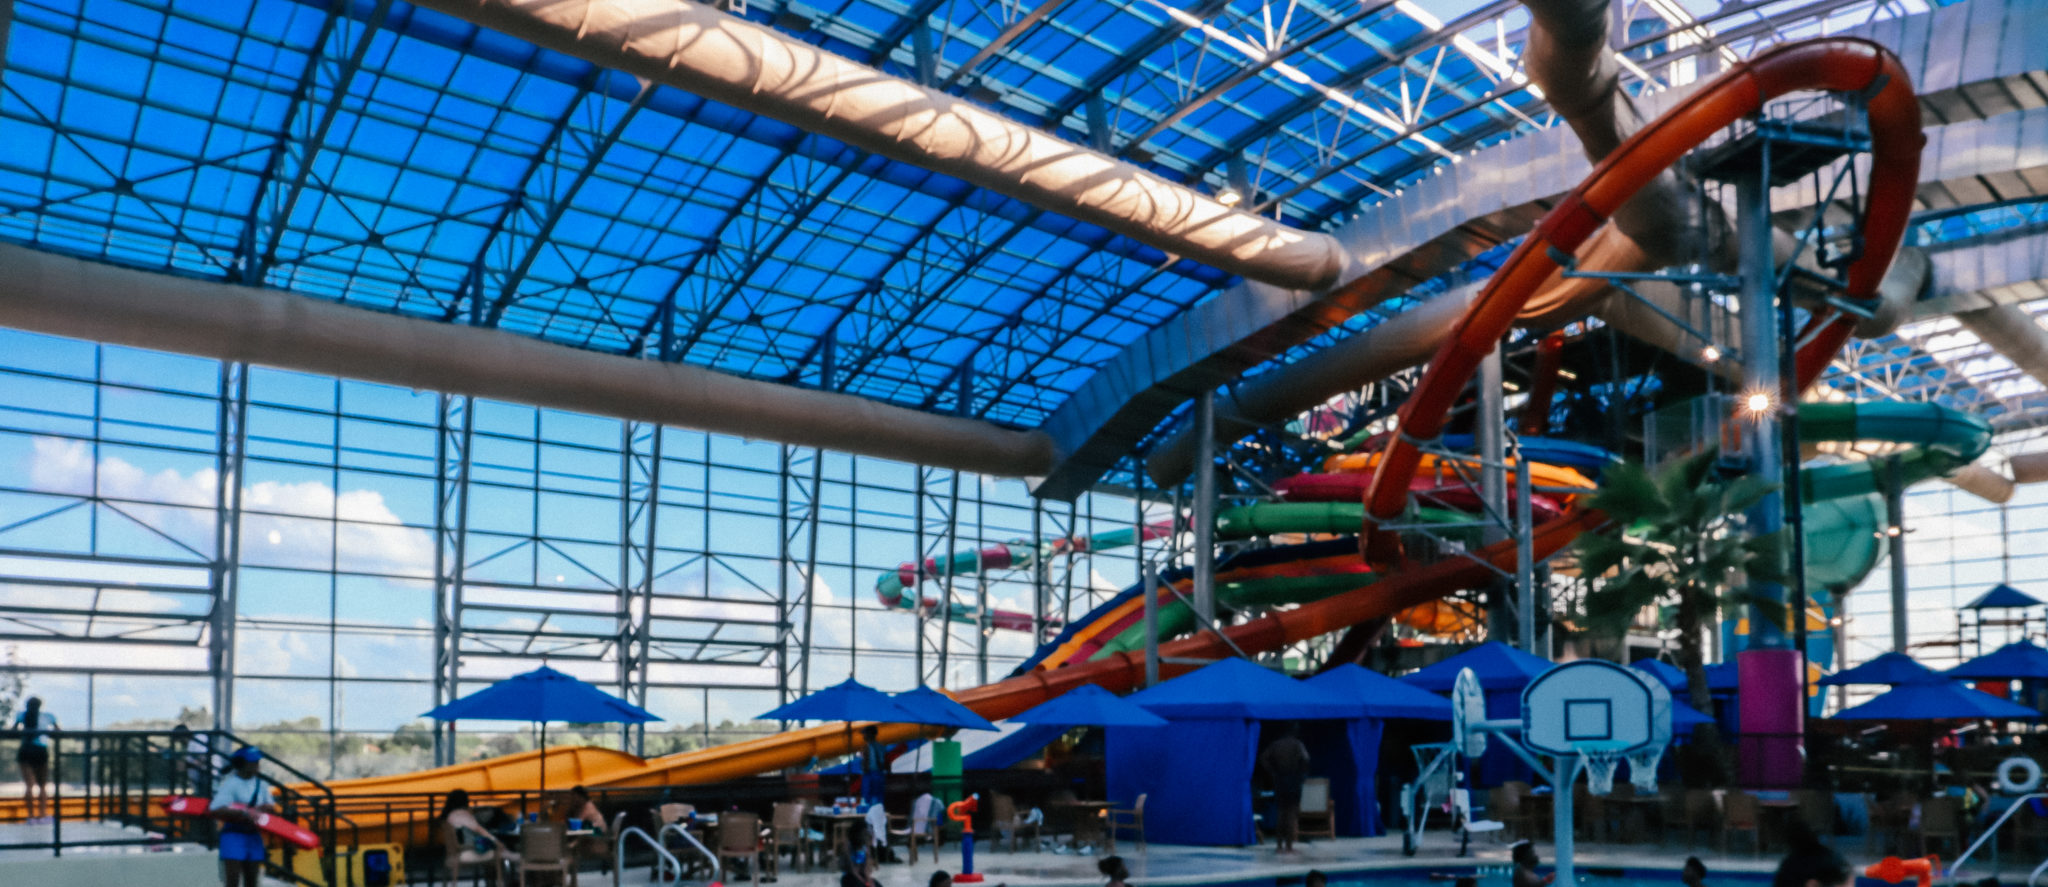 How to plan your visit to Epic Waters indoor water park - Ripped Jeans ...